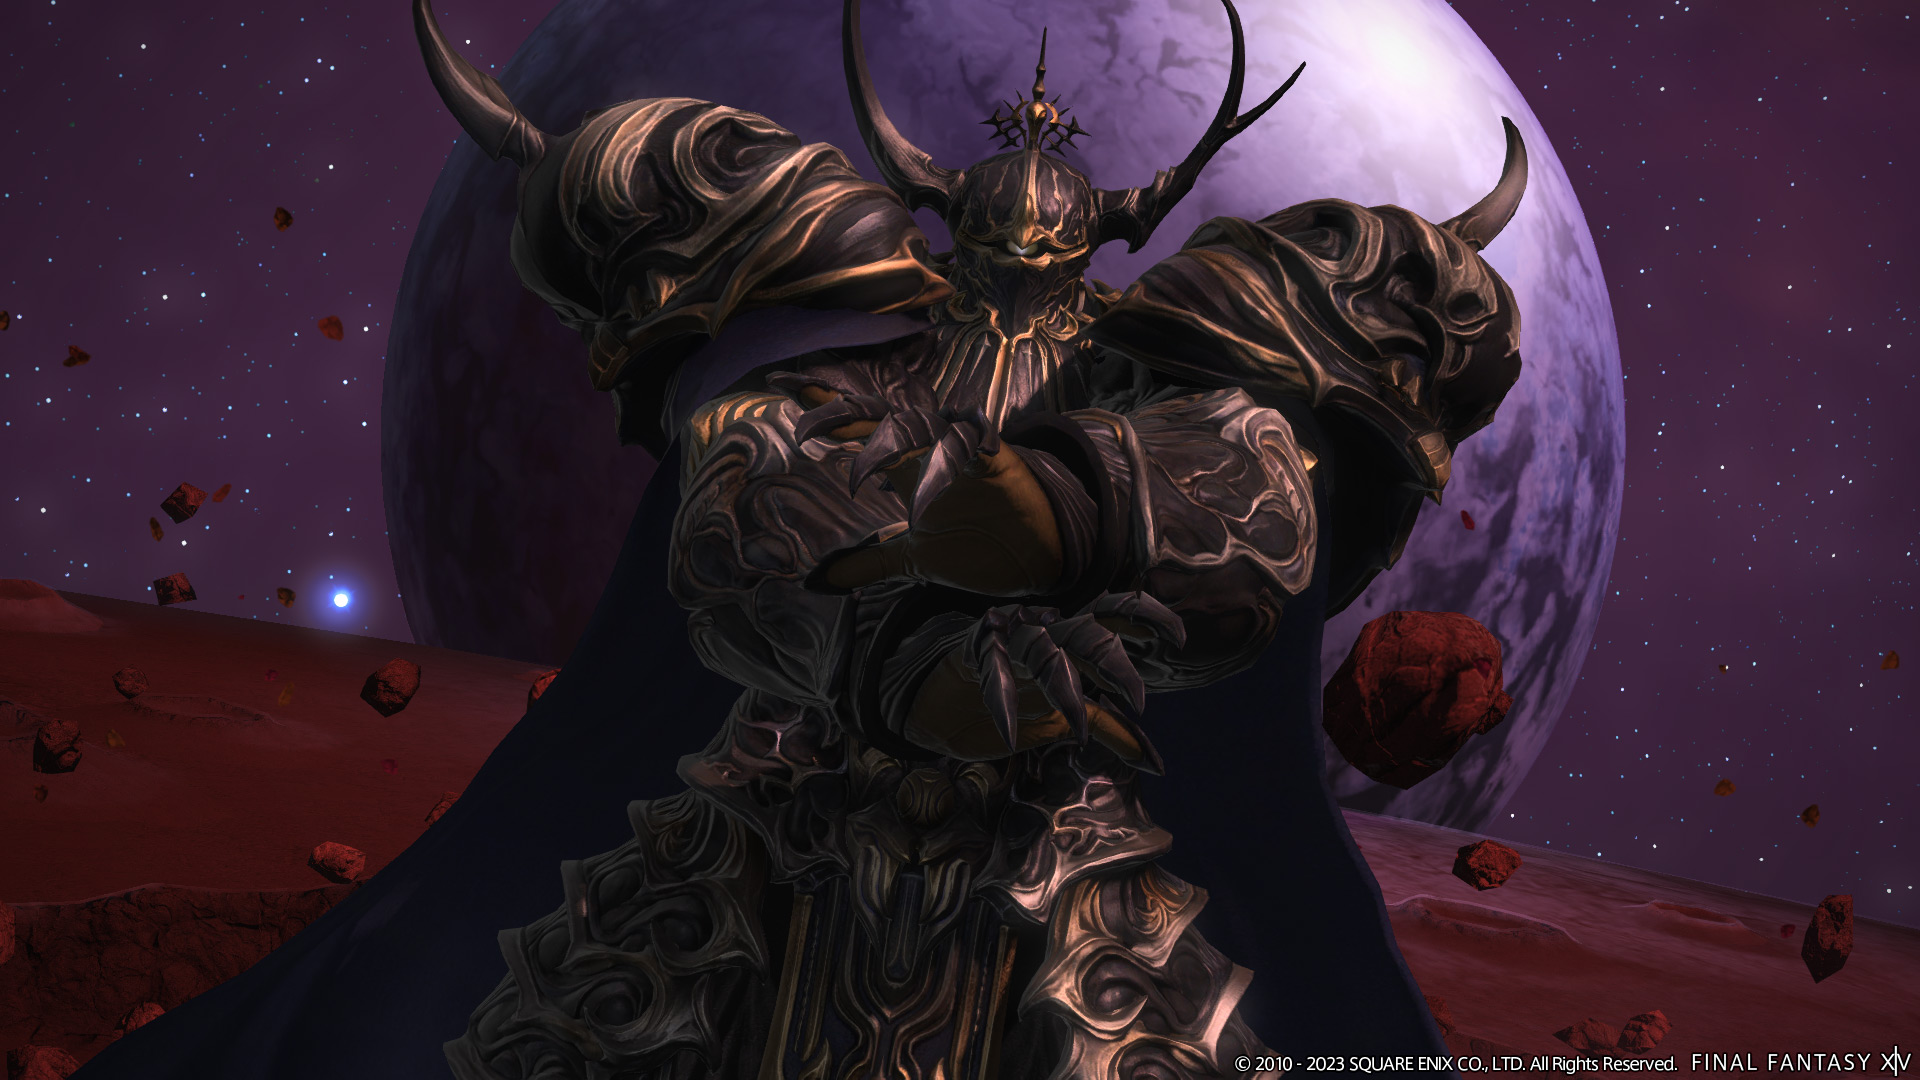 Final Fantasy XIV Patch 6.4 arrives May 23, 2023